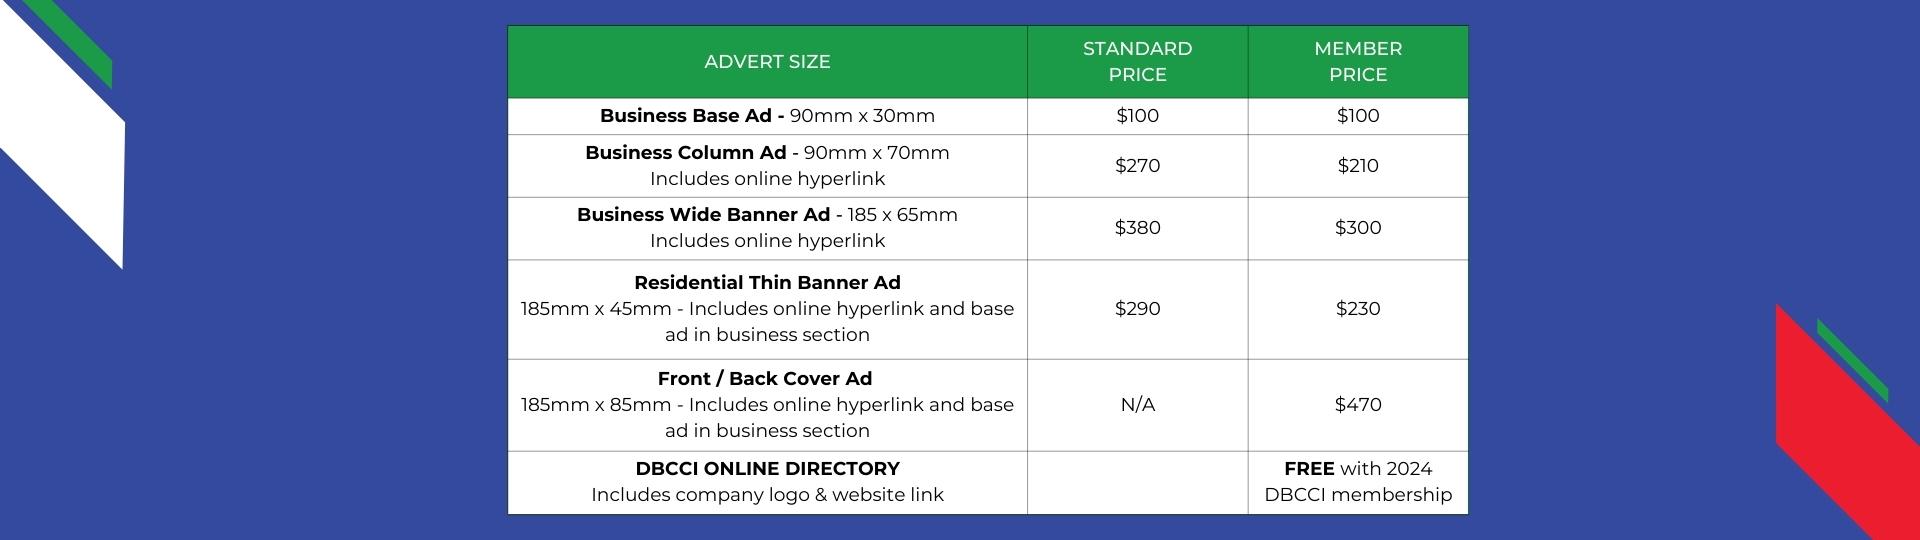 2024 Advertising rates table